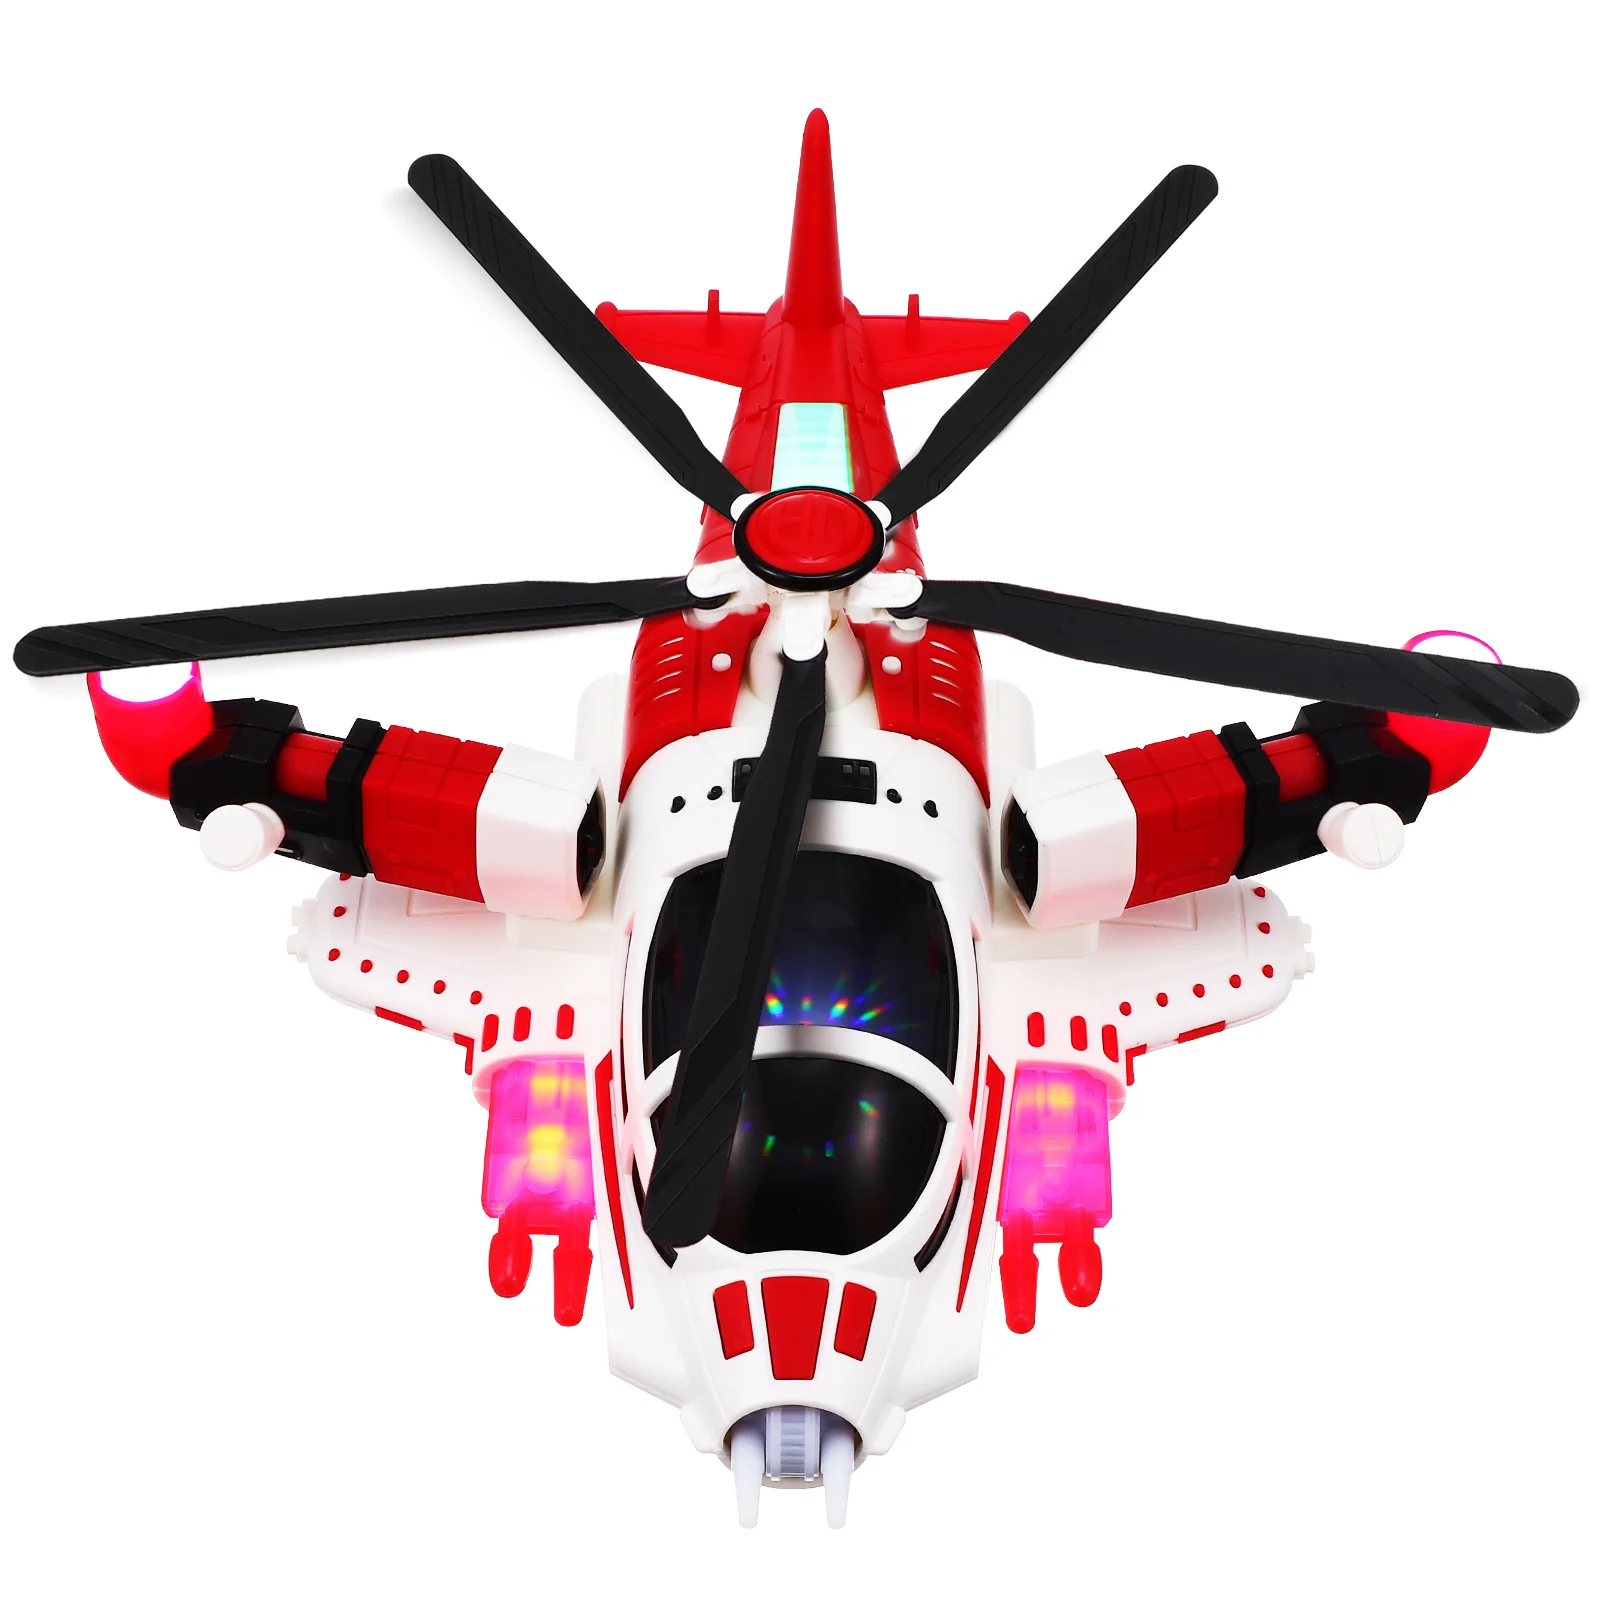 Transforming Aircraft (1 Red) Airplane Toy Airplanes Music Toys Out of Shape Plastic Kids Child Aeroplane